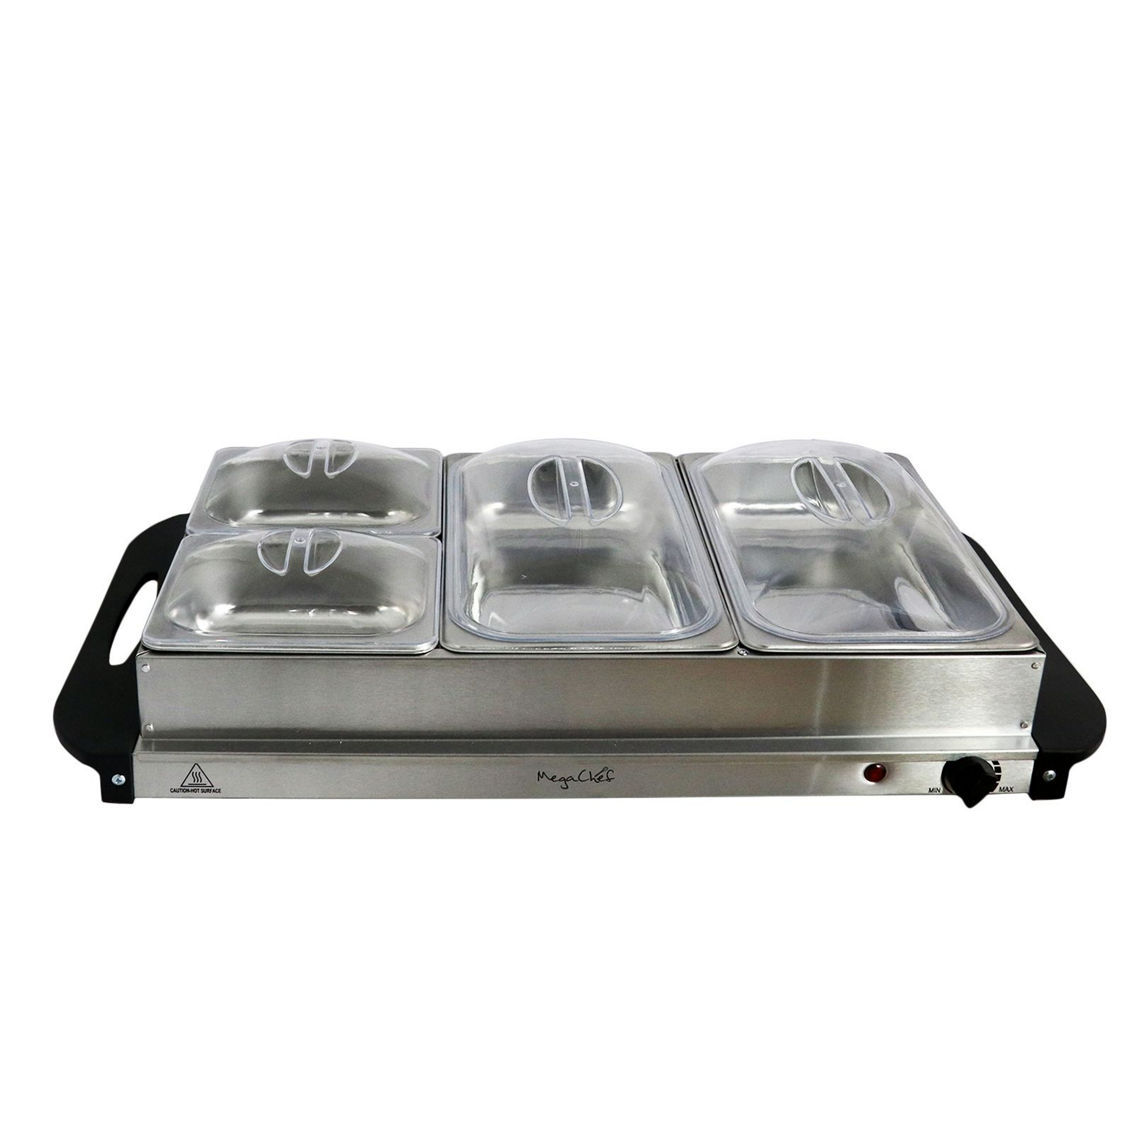 MegaChef Buffet Server & Food Warmer With 4 Removable Sectional Trays , Heated W - Image 4 of 5